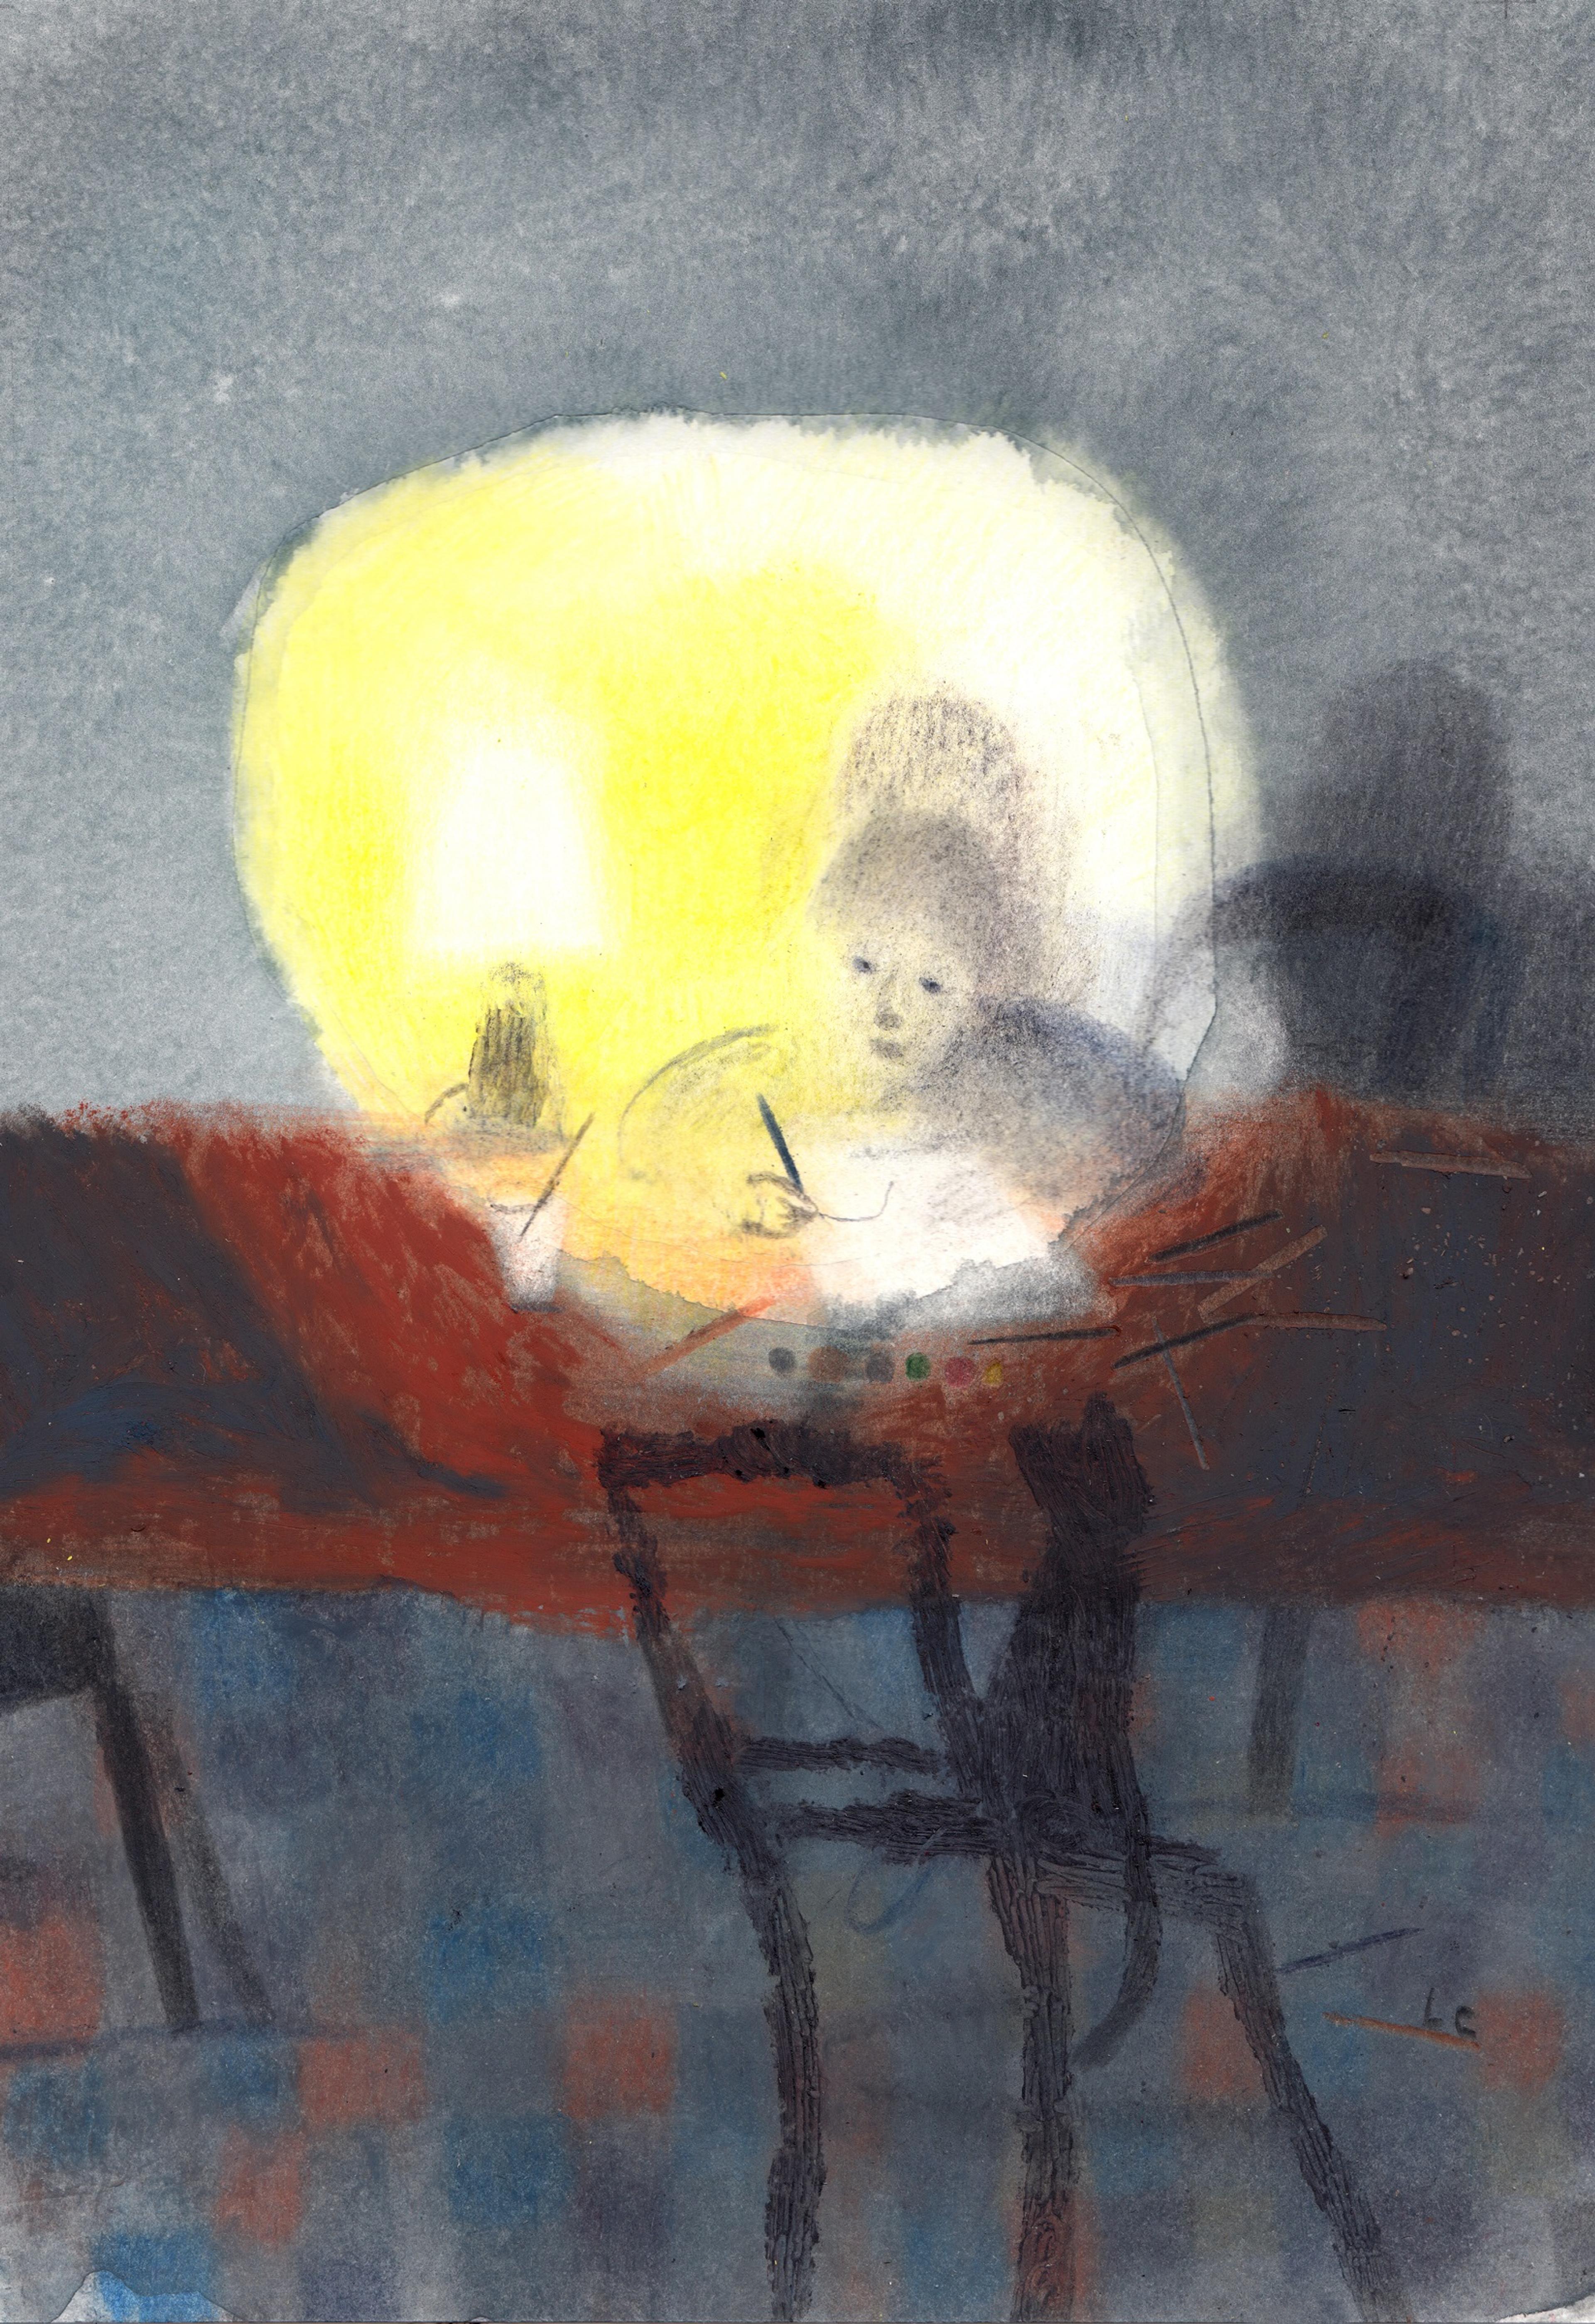 Illustration of a person writing or drawing by candlelight